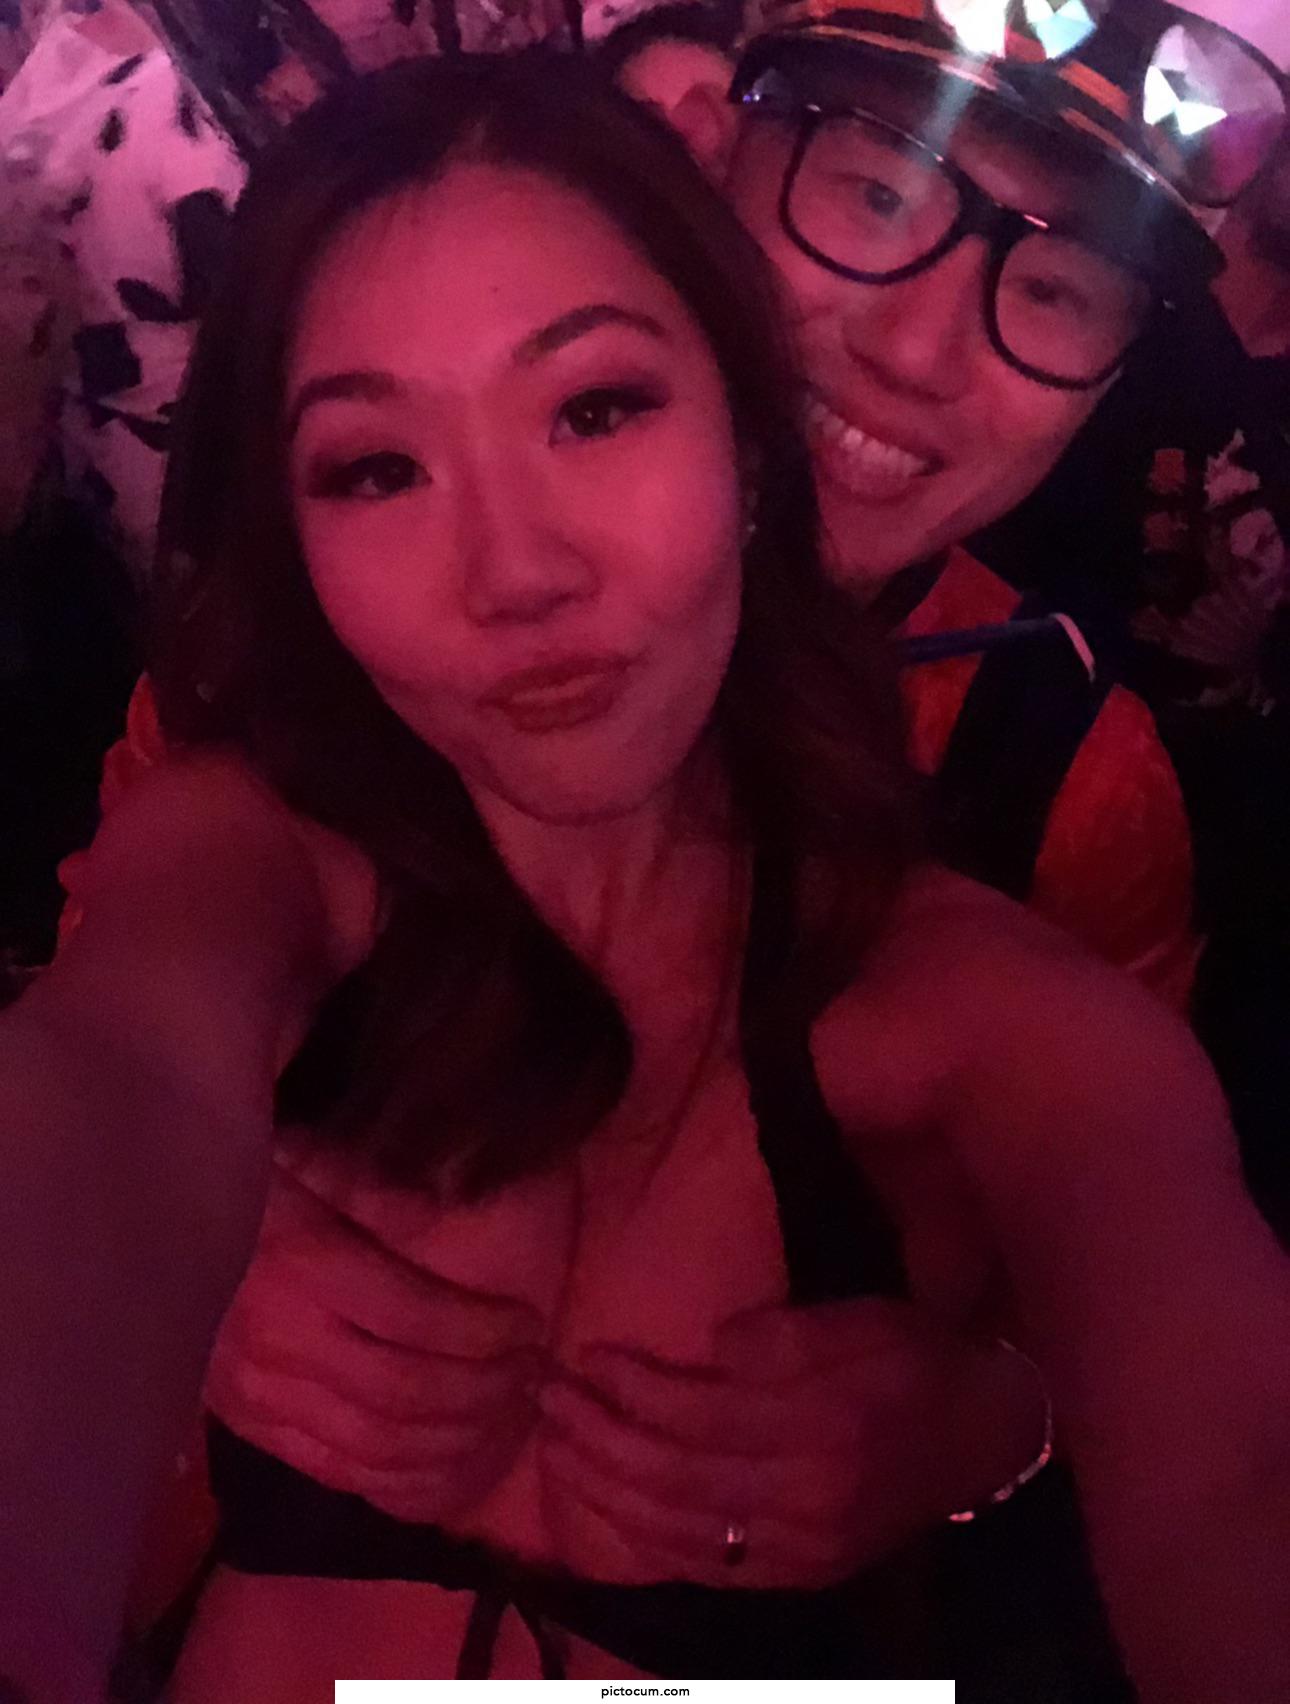 Another boob grab